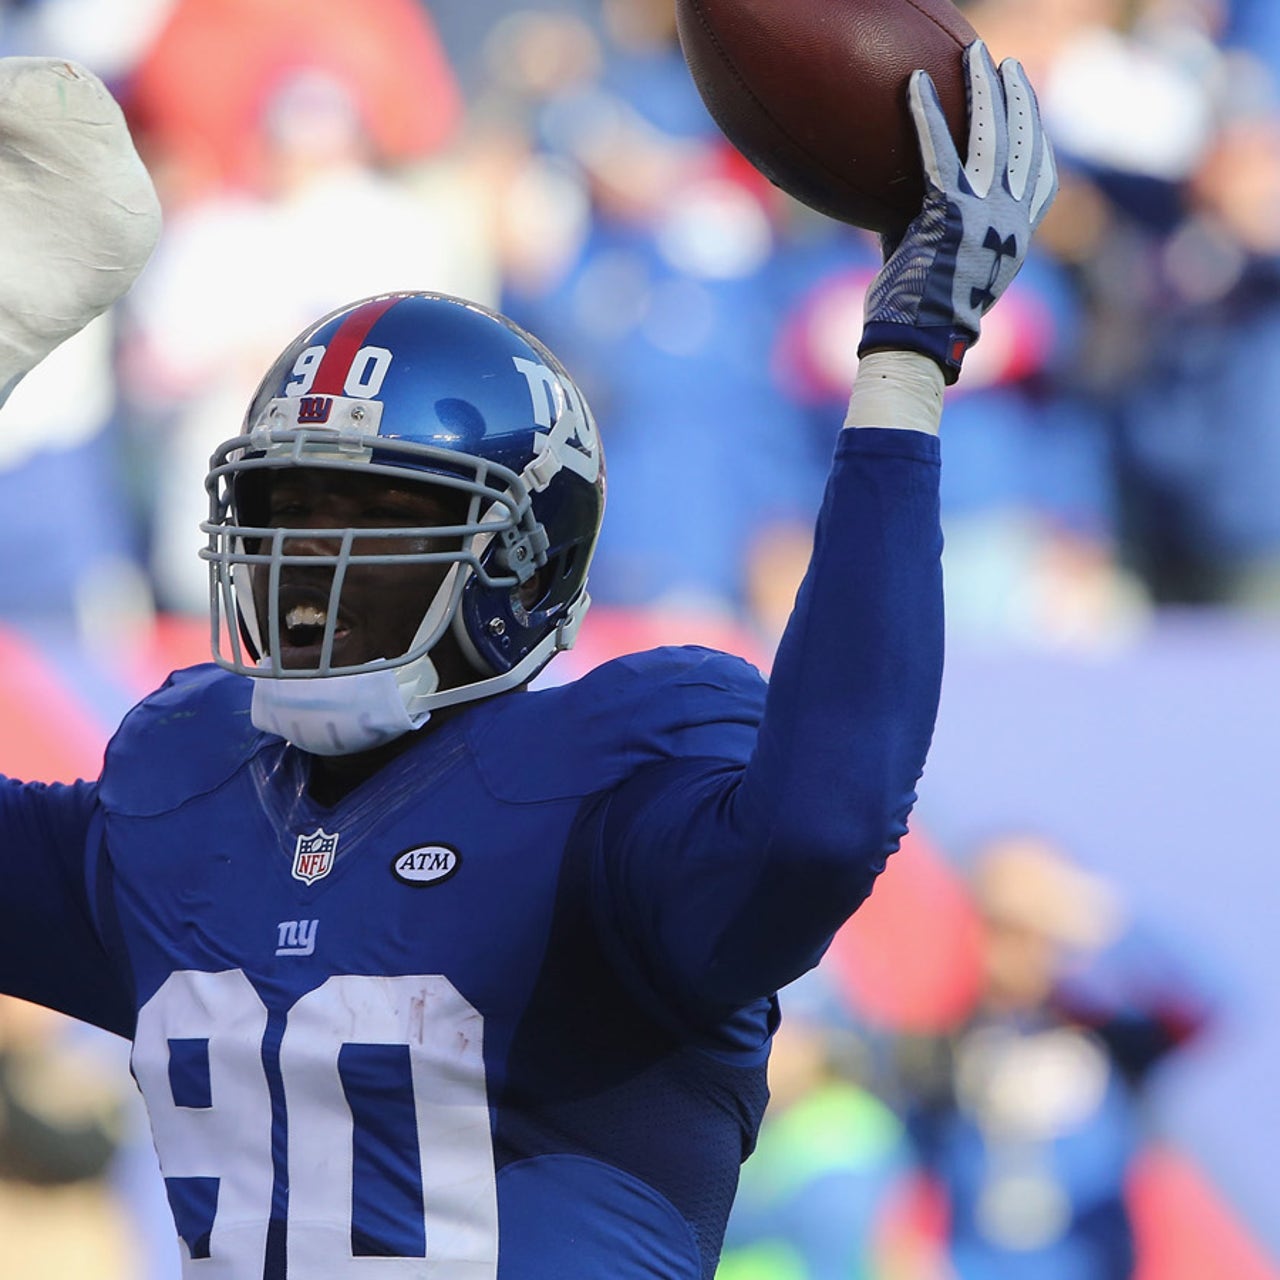 Jason Pierre-Paul proves he can grip a football again with his injured hand